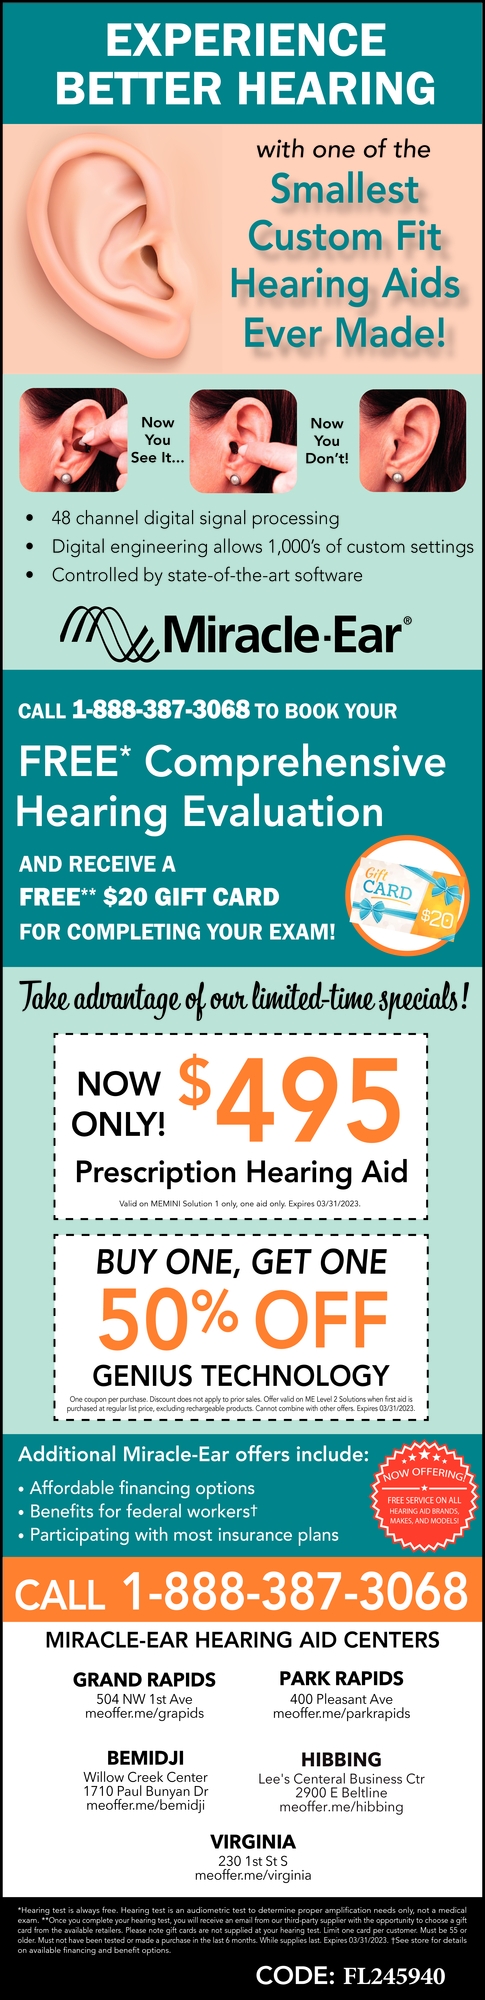 Experience Better Hearing